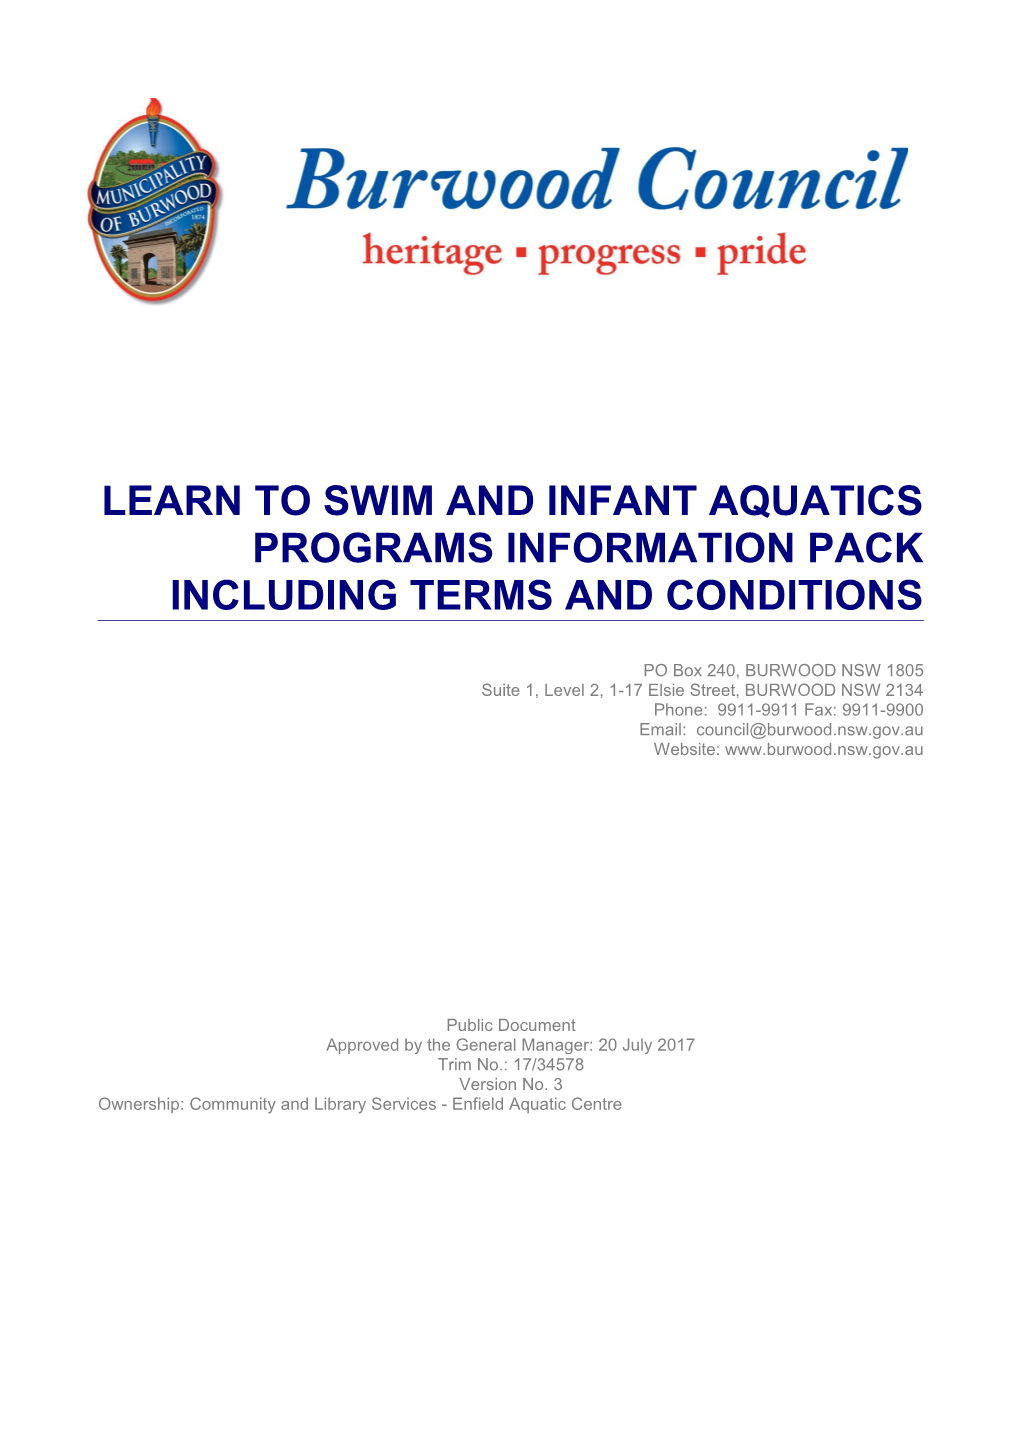 Learn to Swim and INFANT AQUATICS PROGRAMS INFORMATION Pack Including Terms and Conditions